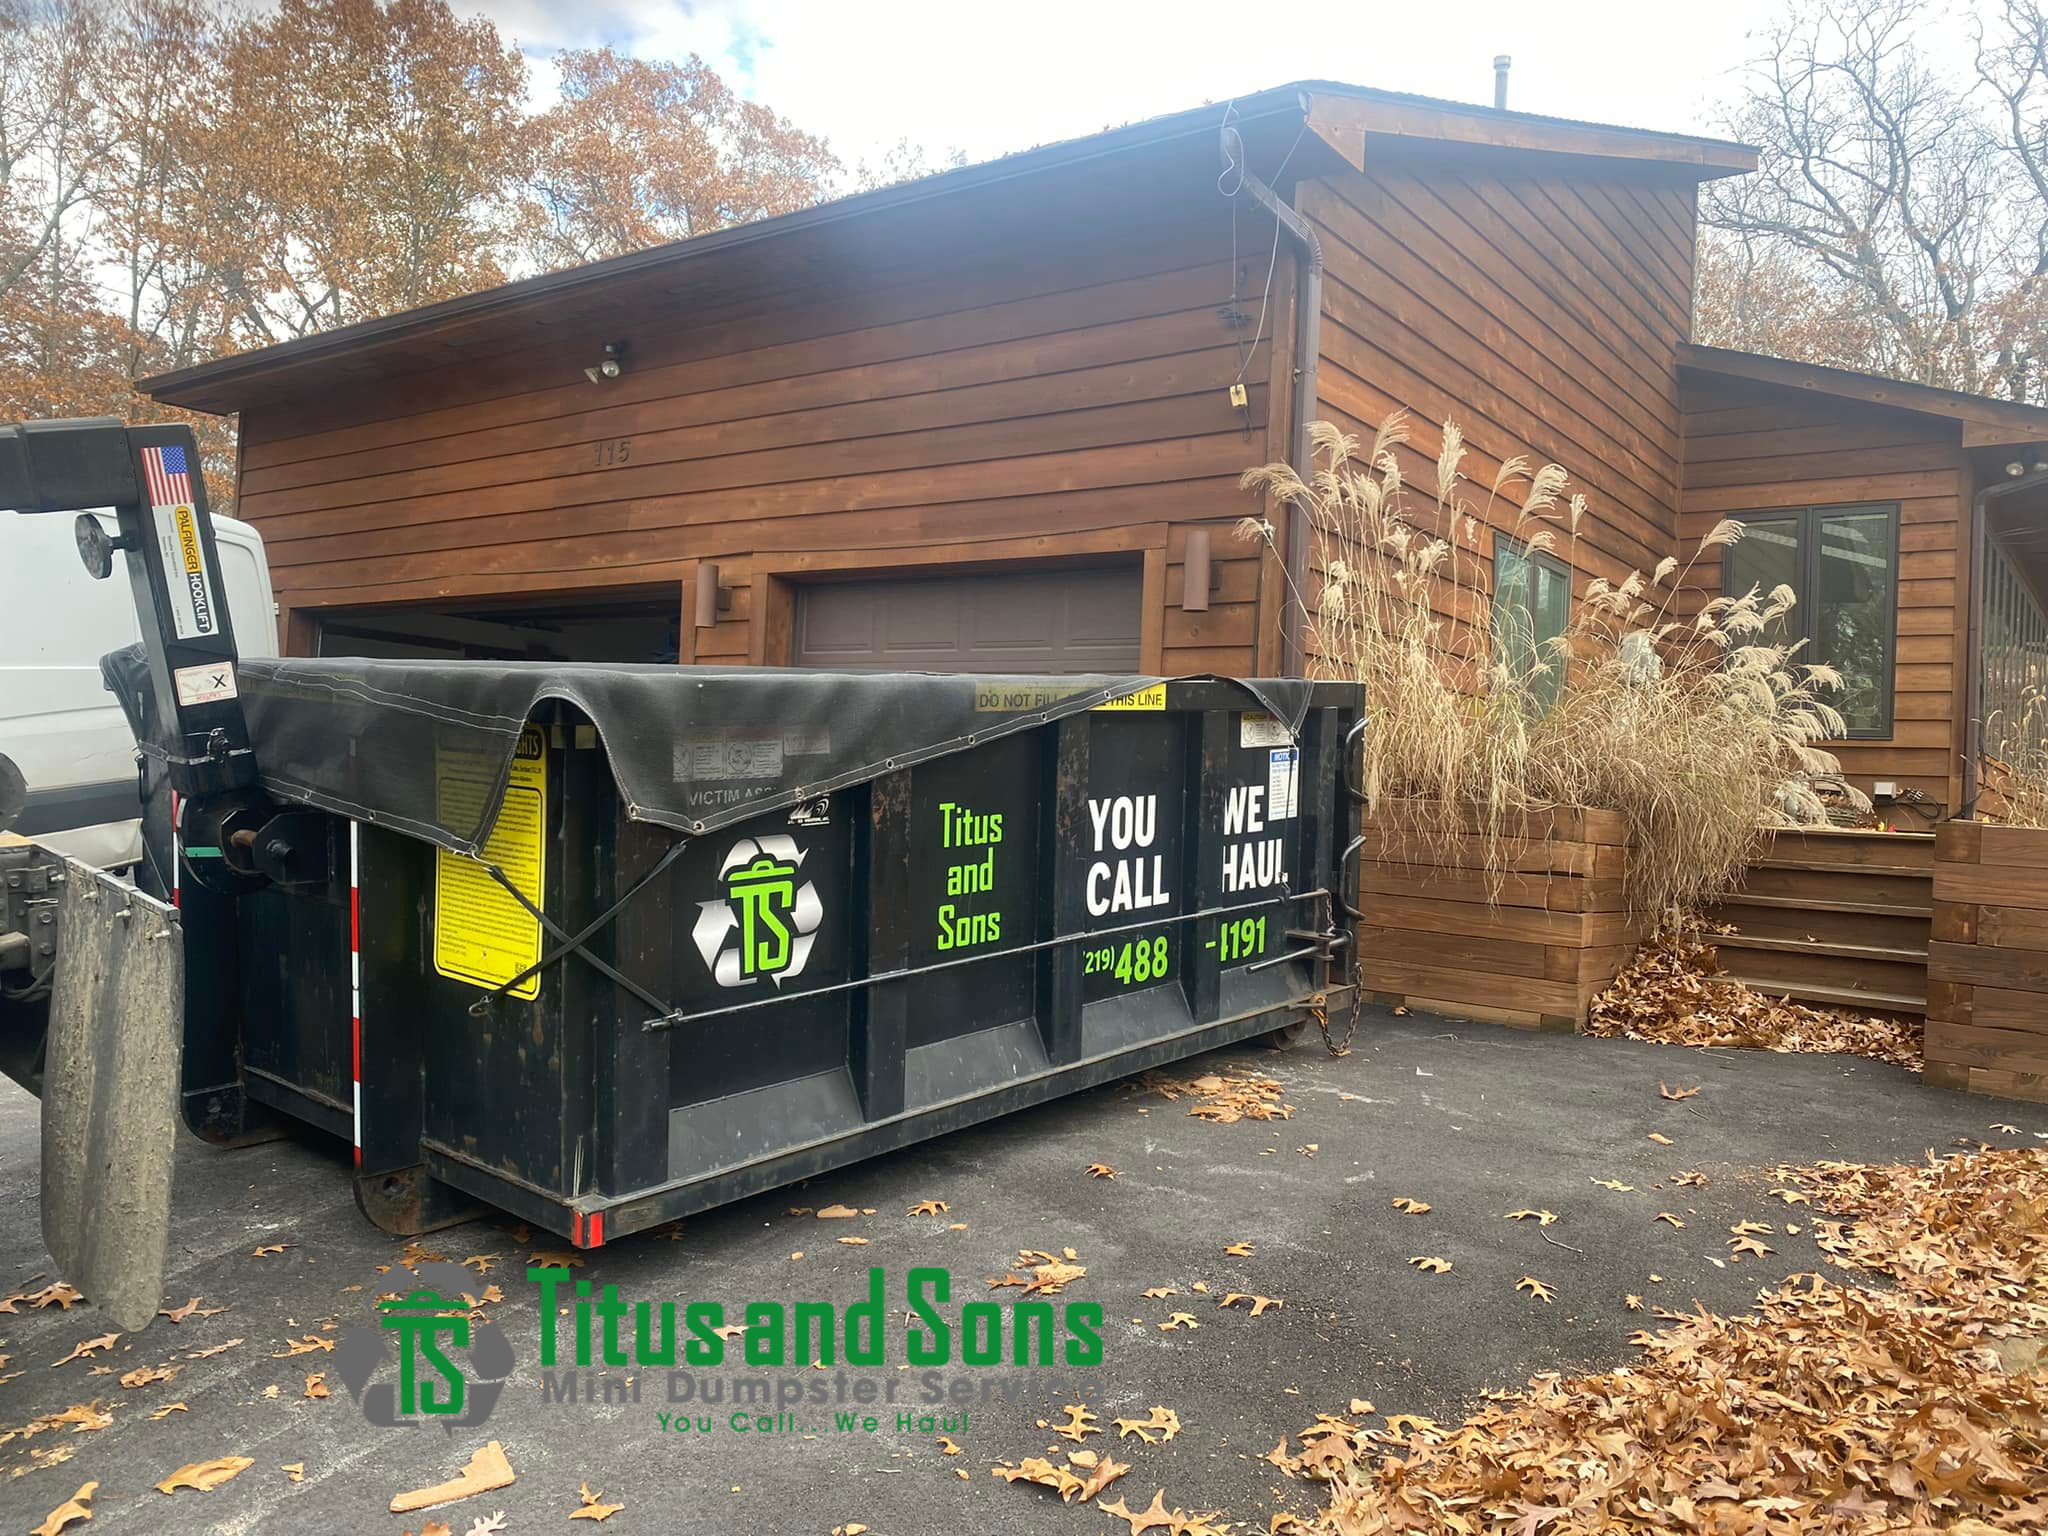 Commercial Dumpster Rental Titus & Sons Valparaiso IN